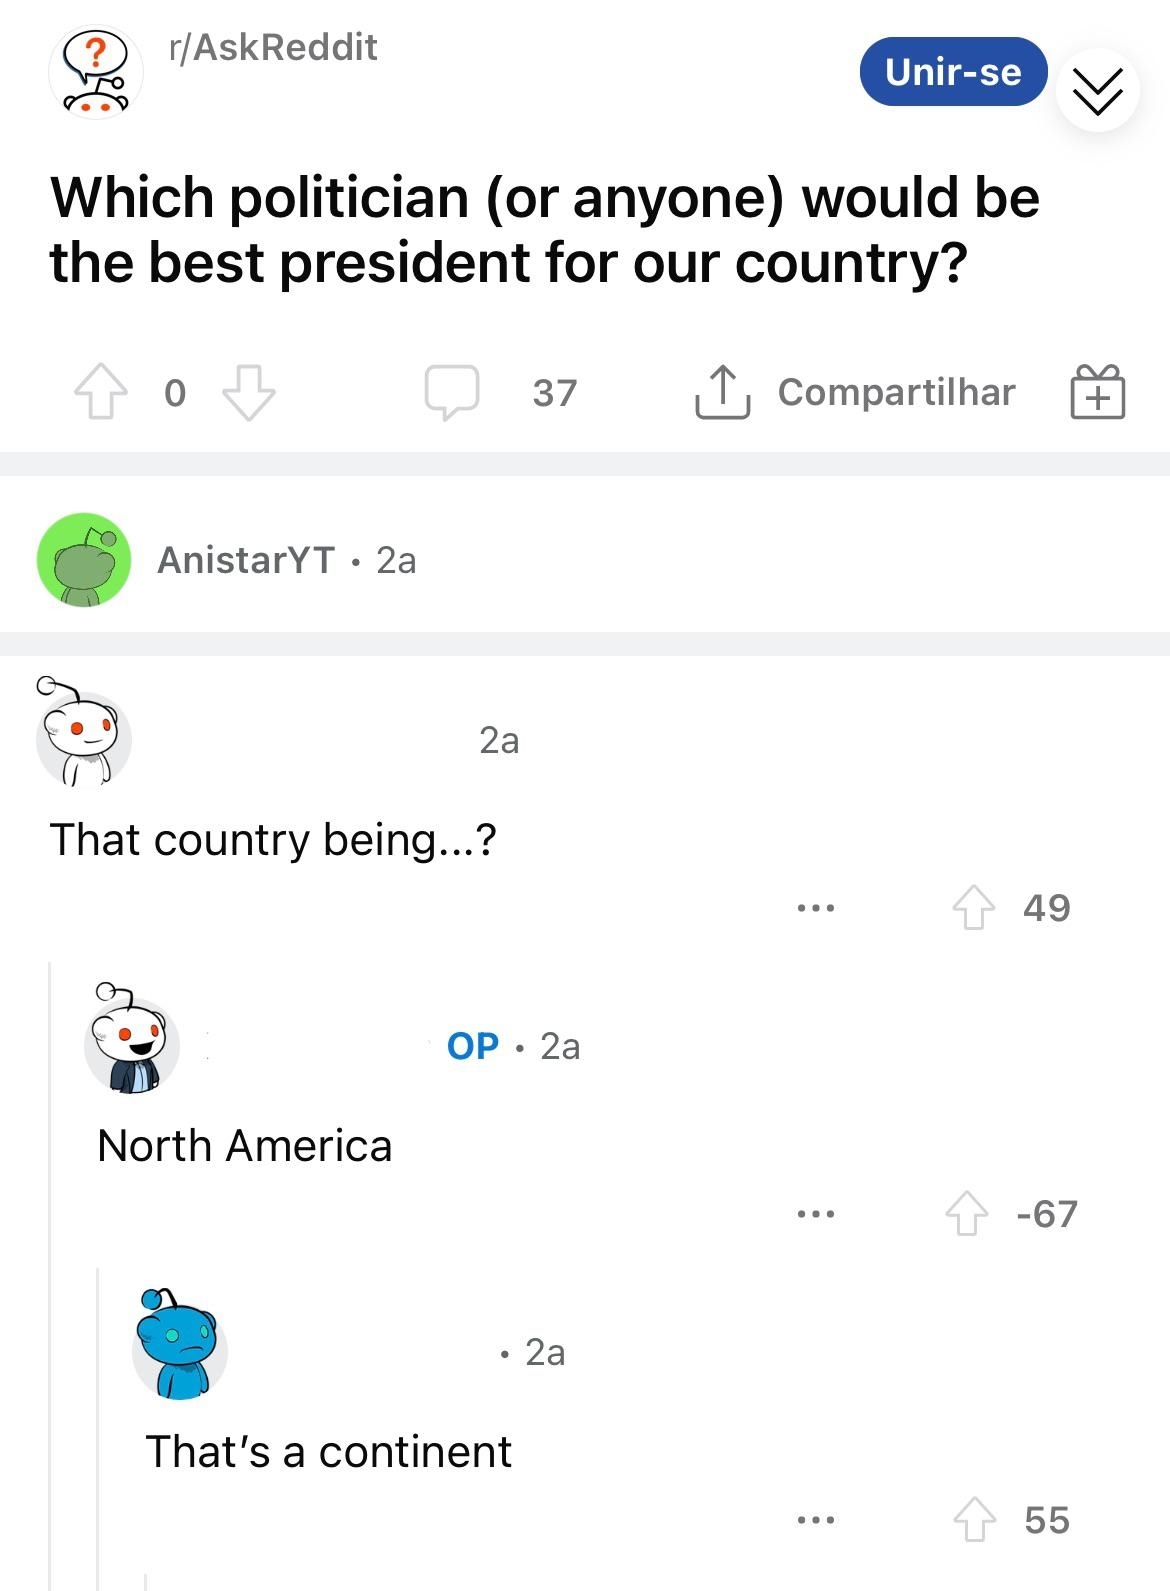 &quot;Which president (or anyone) would be the best president for our country?&quot; &quot;That country being?&quot; &quot;North America,&quot; &quot;That&#x27;s a continent&quot;